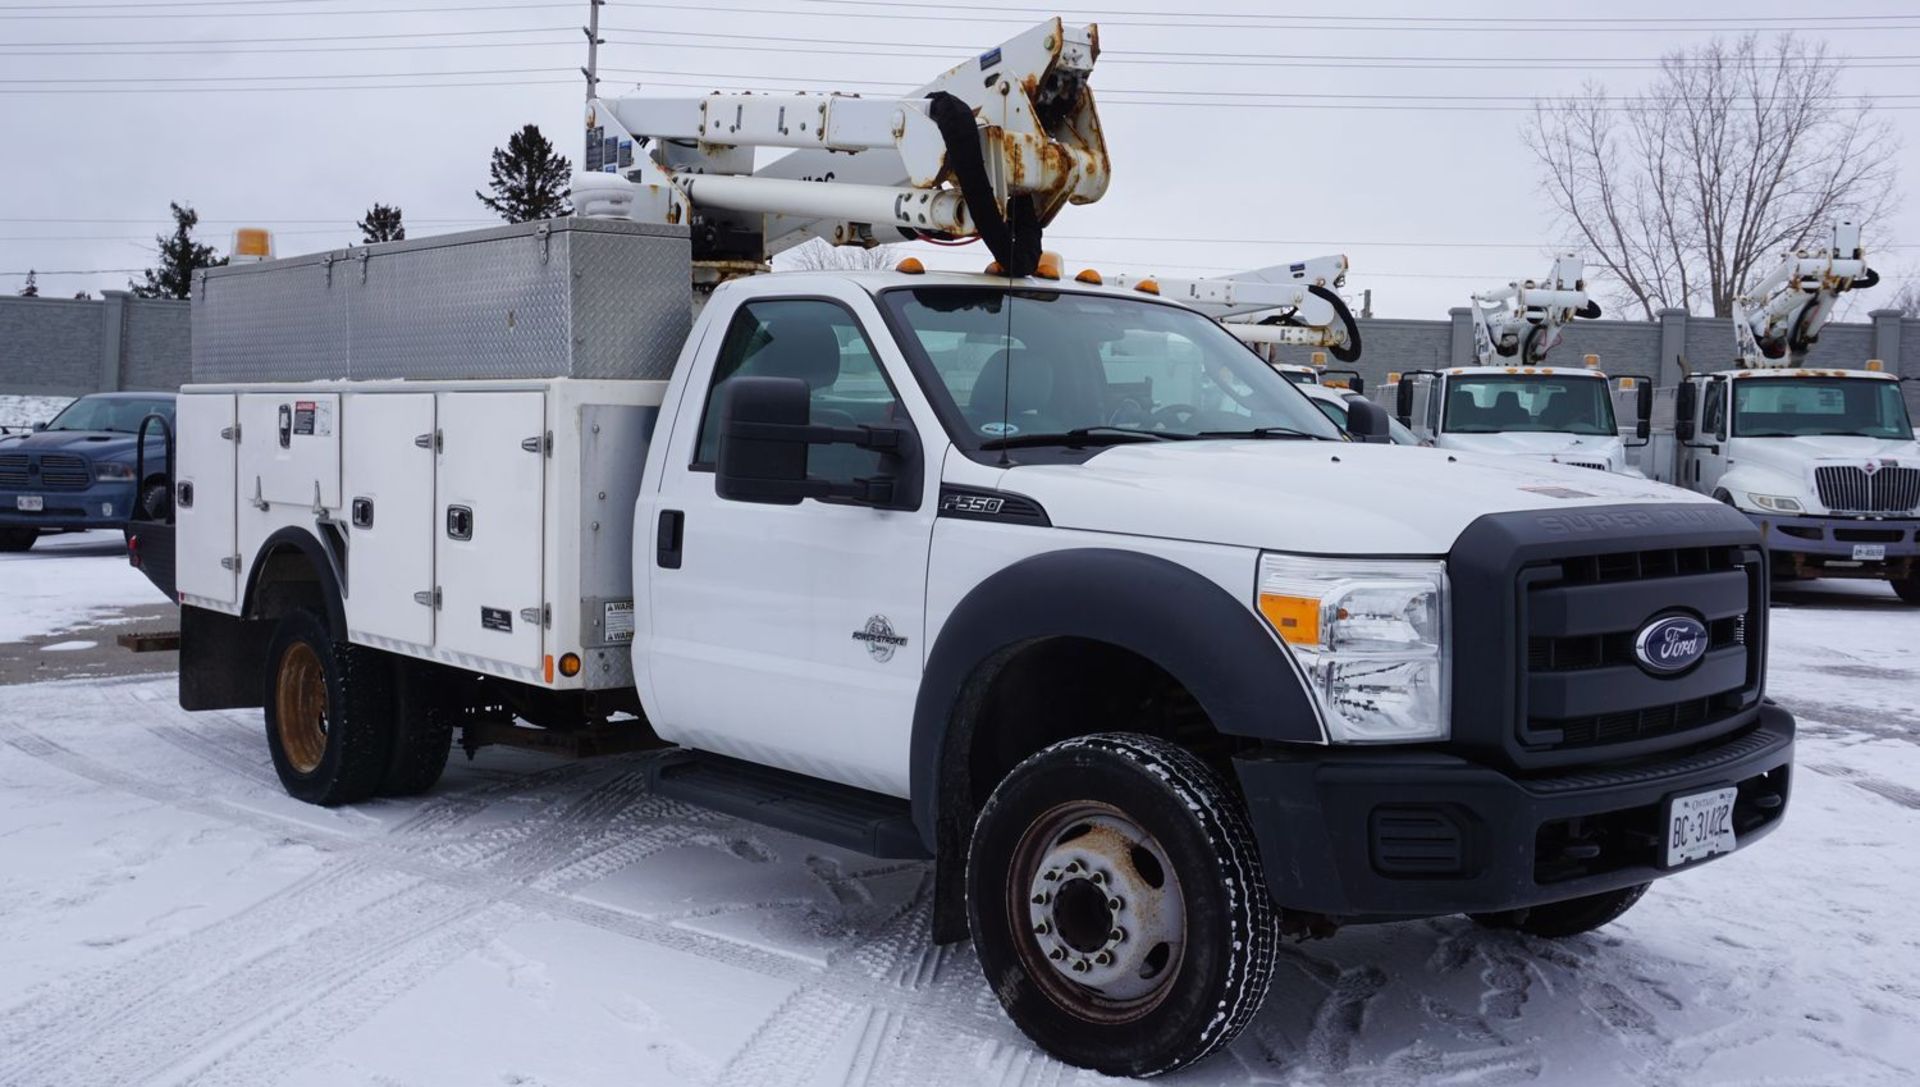 2015 ALTEC AT37G ARTICULATING TELESCOPIC BOOM & BUCKET MOUNTED ON 2015 FORD F550XL SUPER DUTY TRUCK - Image 4 of 18